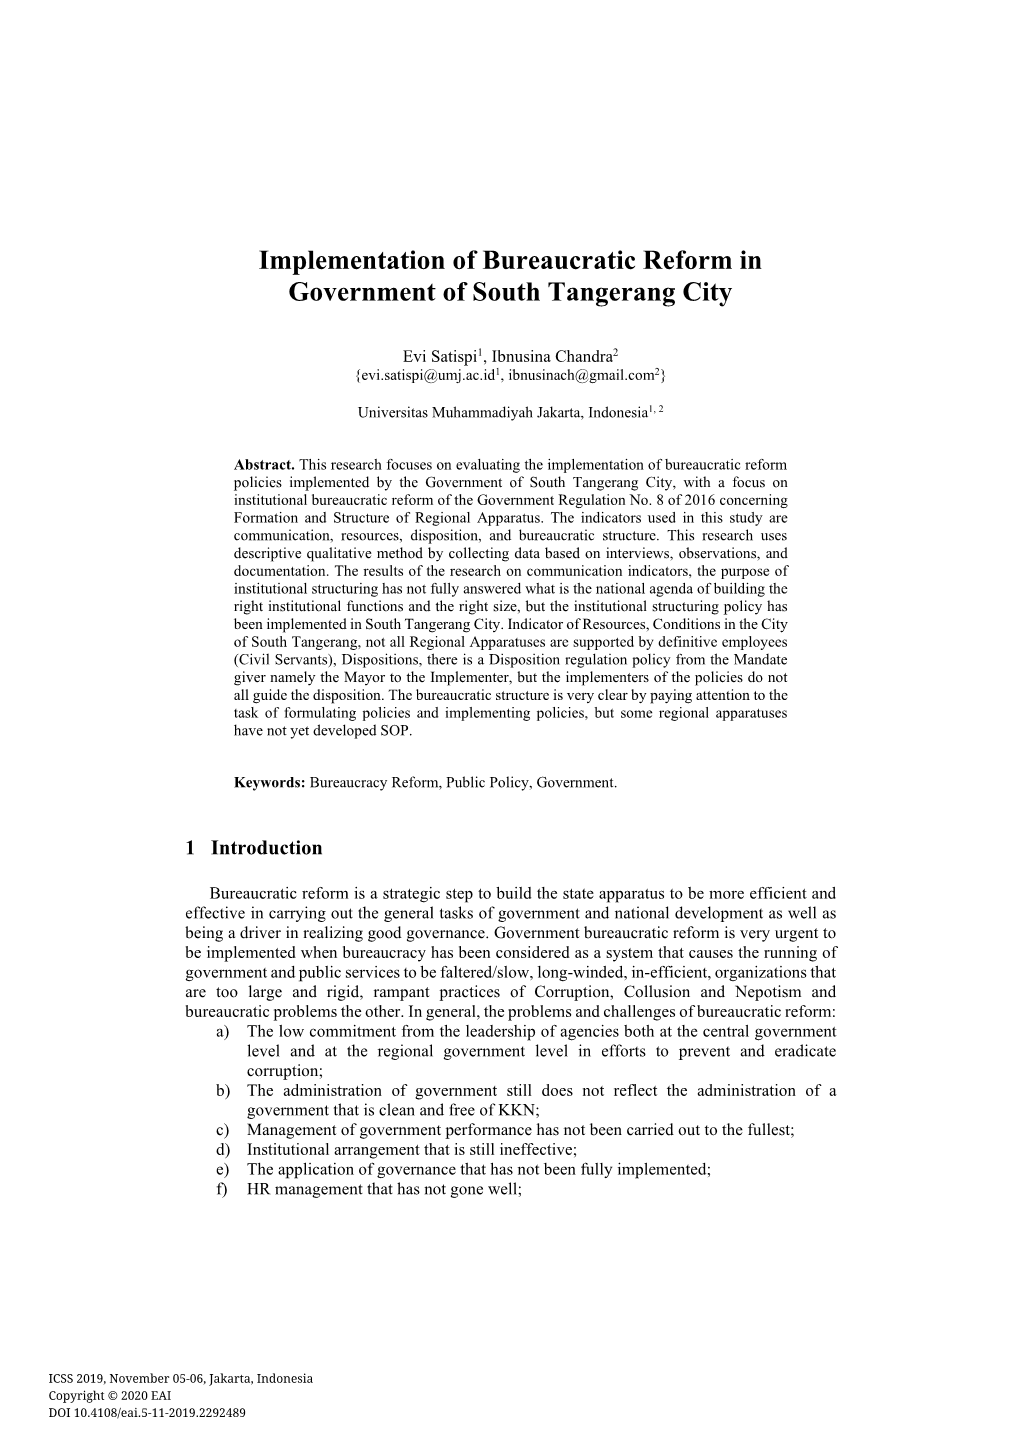 Implementation of Bureaucratic Reform in Government of South Tangerang City